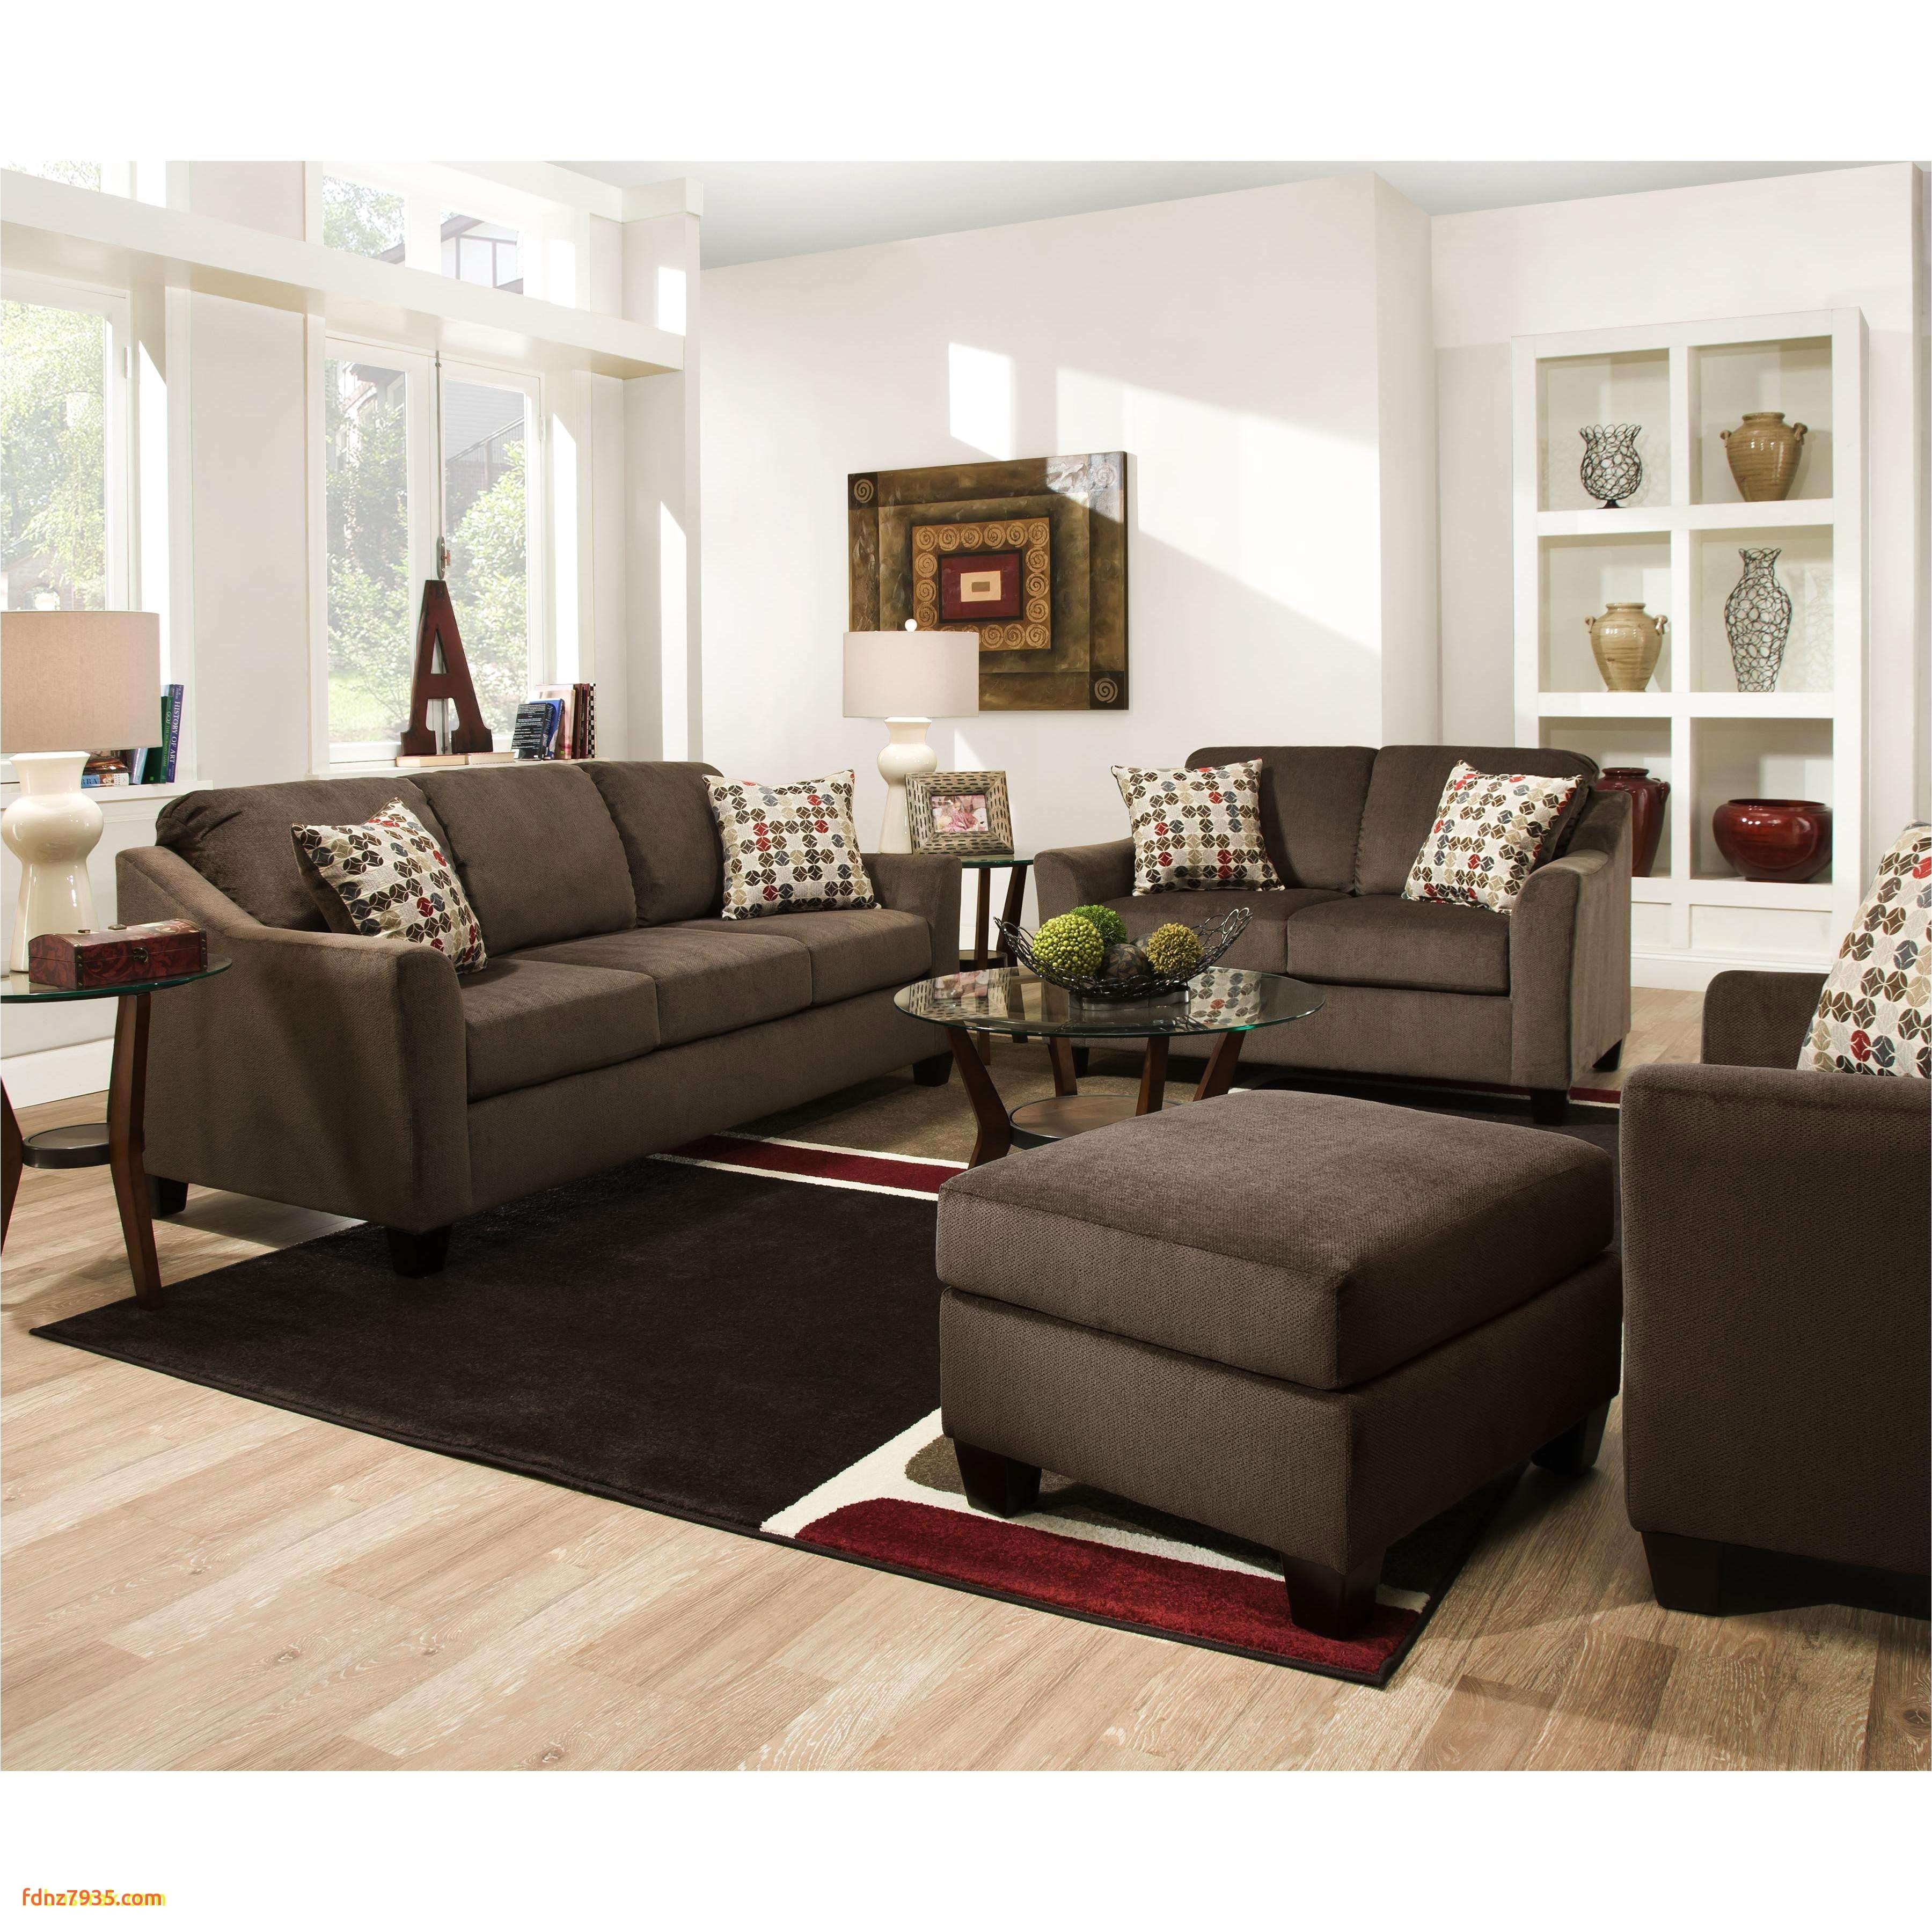 full size of furniture cheap small couches elegant furniture small couches elegant davenport couch 0d